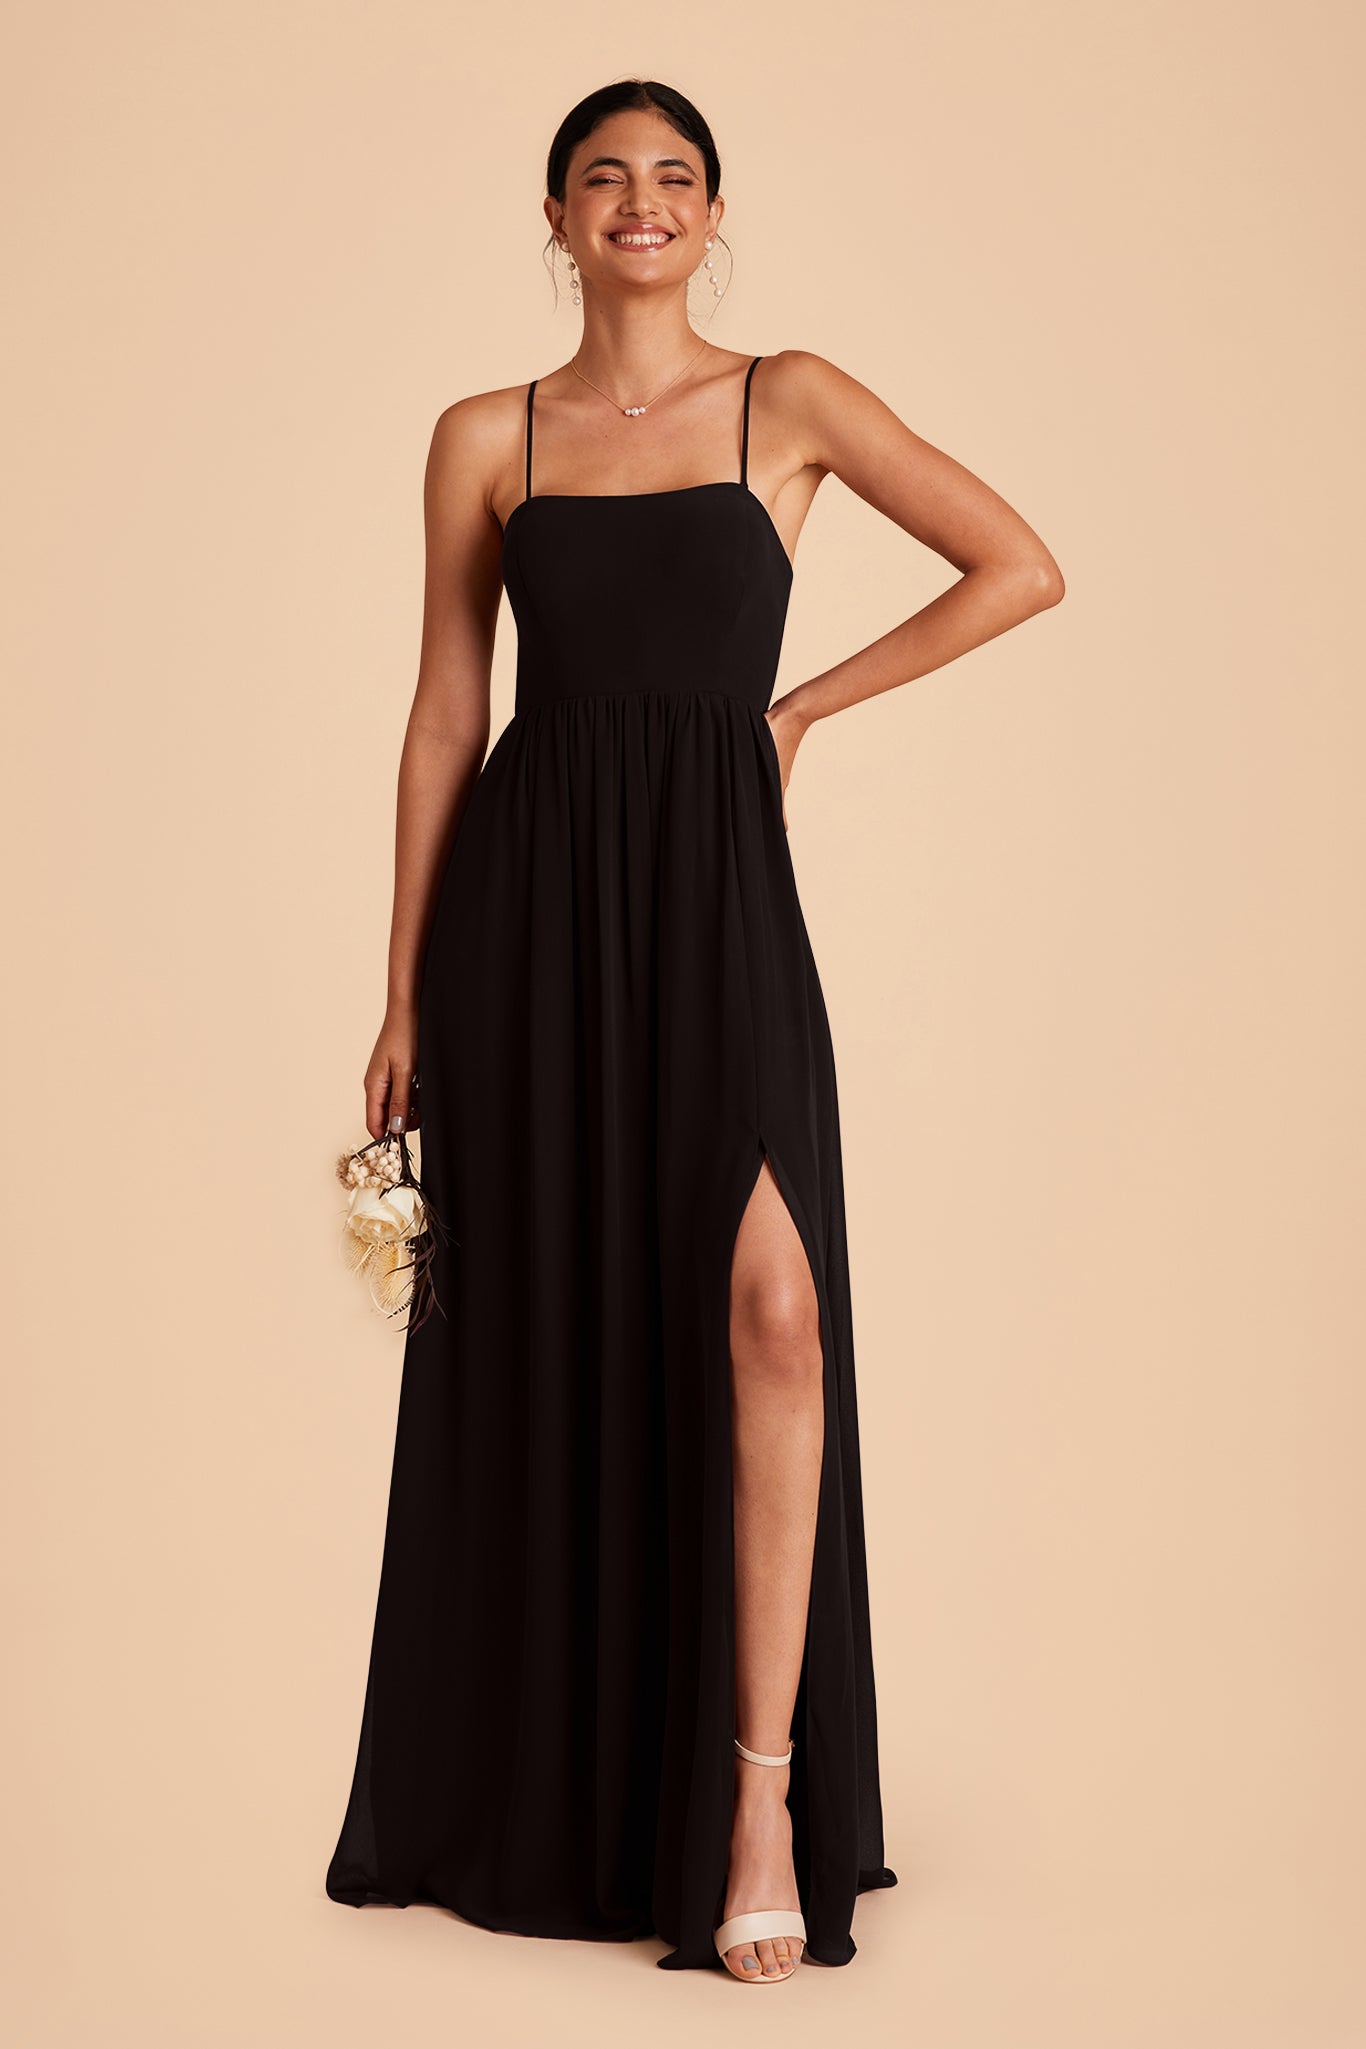 August bridesmaid dress with slit in black chiffon by Birdy Grey, front view